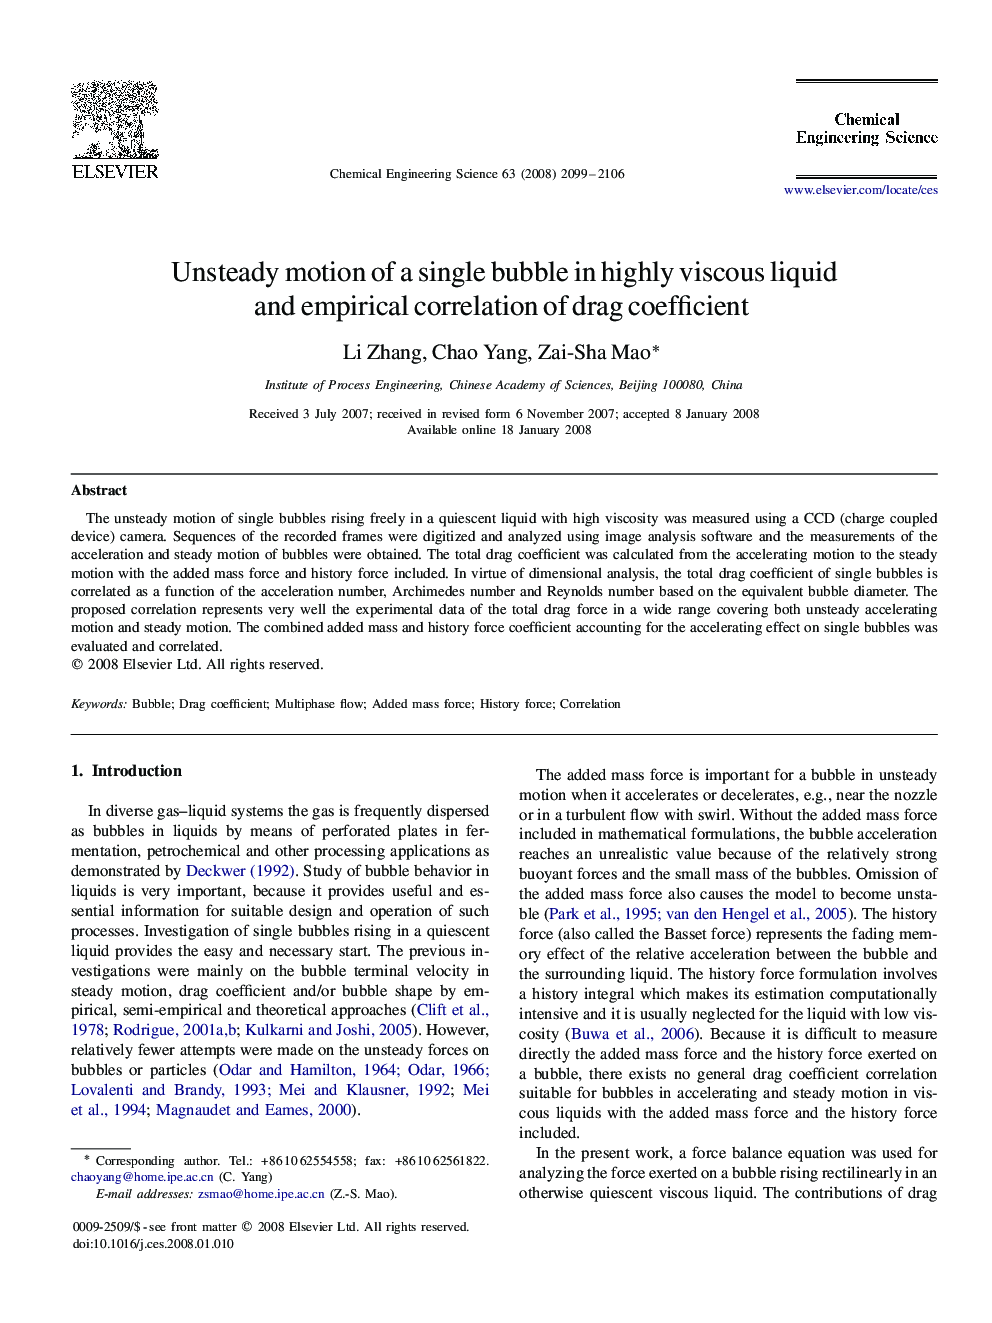 Unsteady motion of a single bubble in highly viscous liquid and empirical correlation of drag coefficient